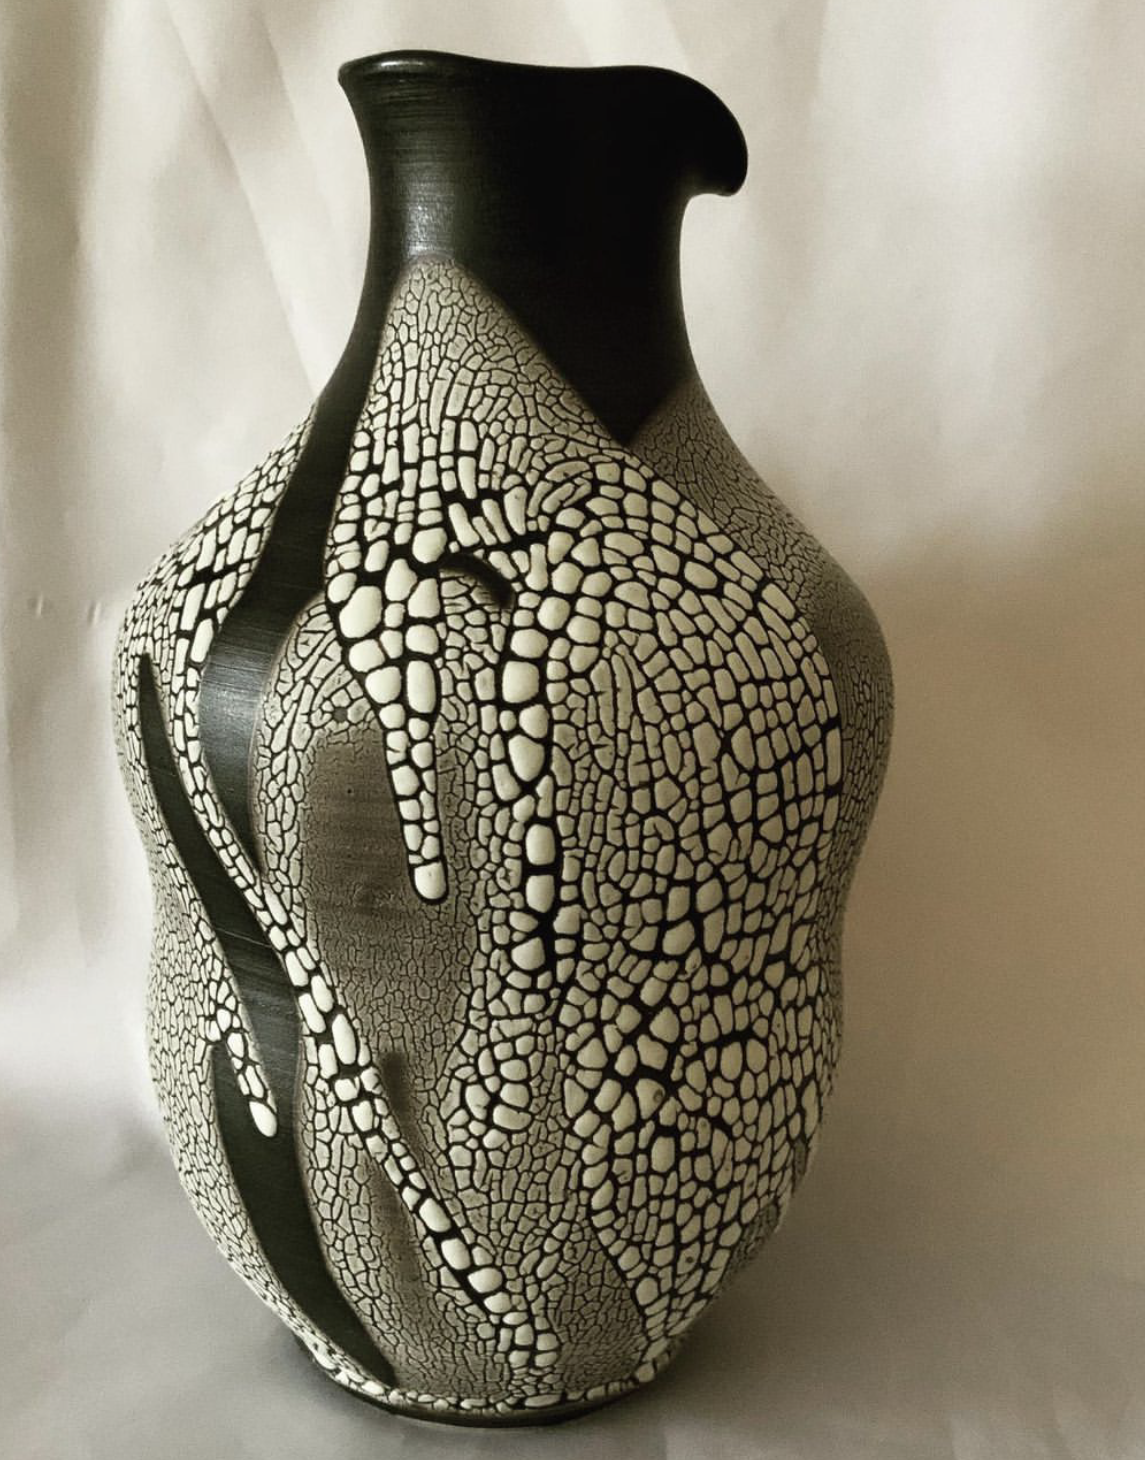 Maggie Anderson made this beautiful piece for the show.on, one of the pieces that will be in the "But Does It Pour" exhibit at the Johnson Heritage Post.